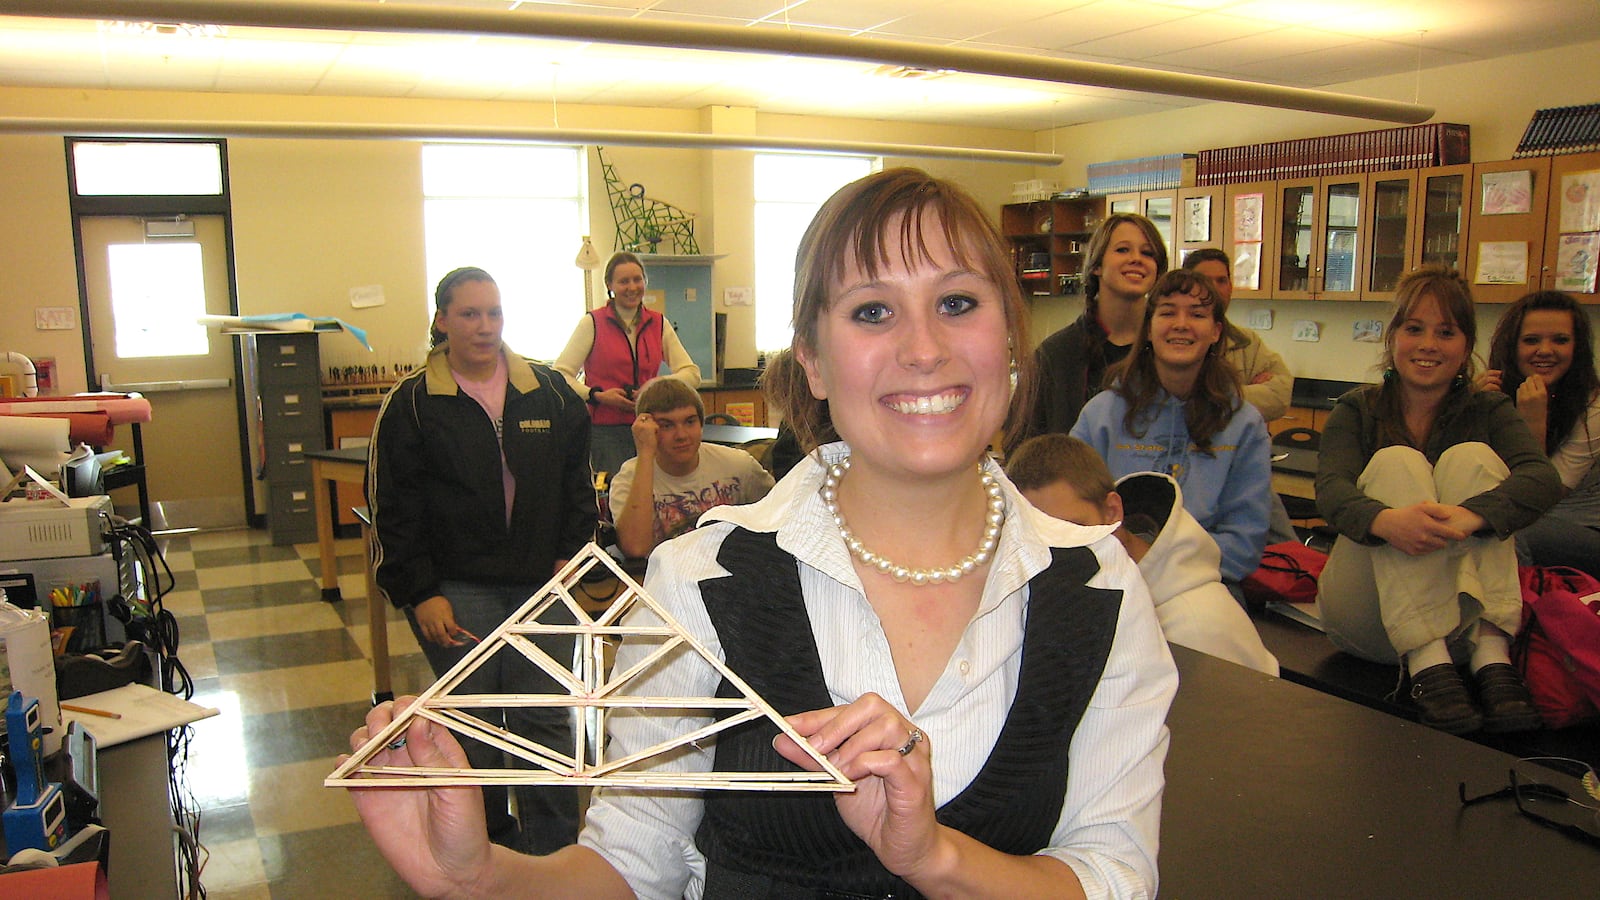 Shannon Wachowski, a science teacher at Platte Valley High School, holds a toothpick bridge as a her students look on.